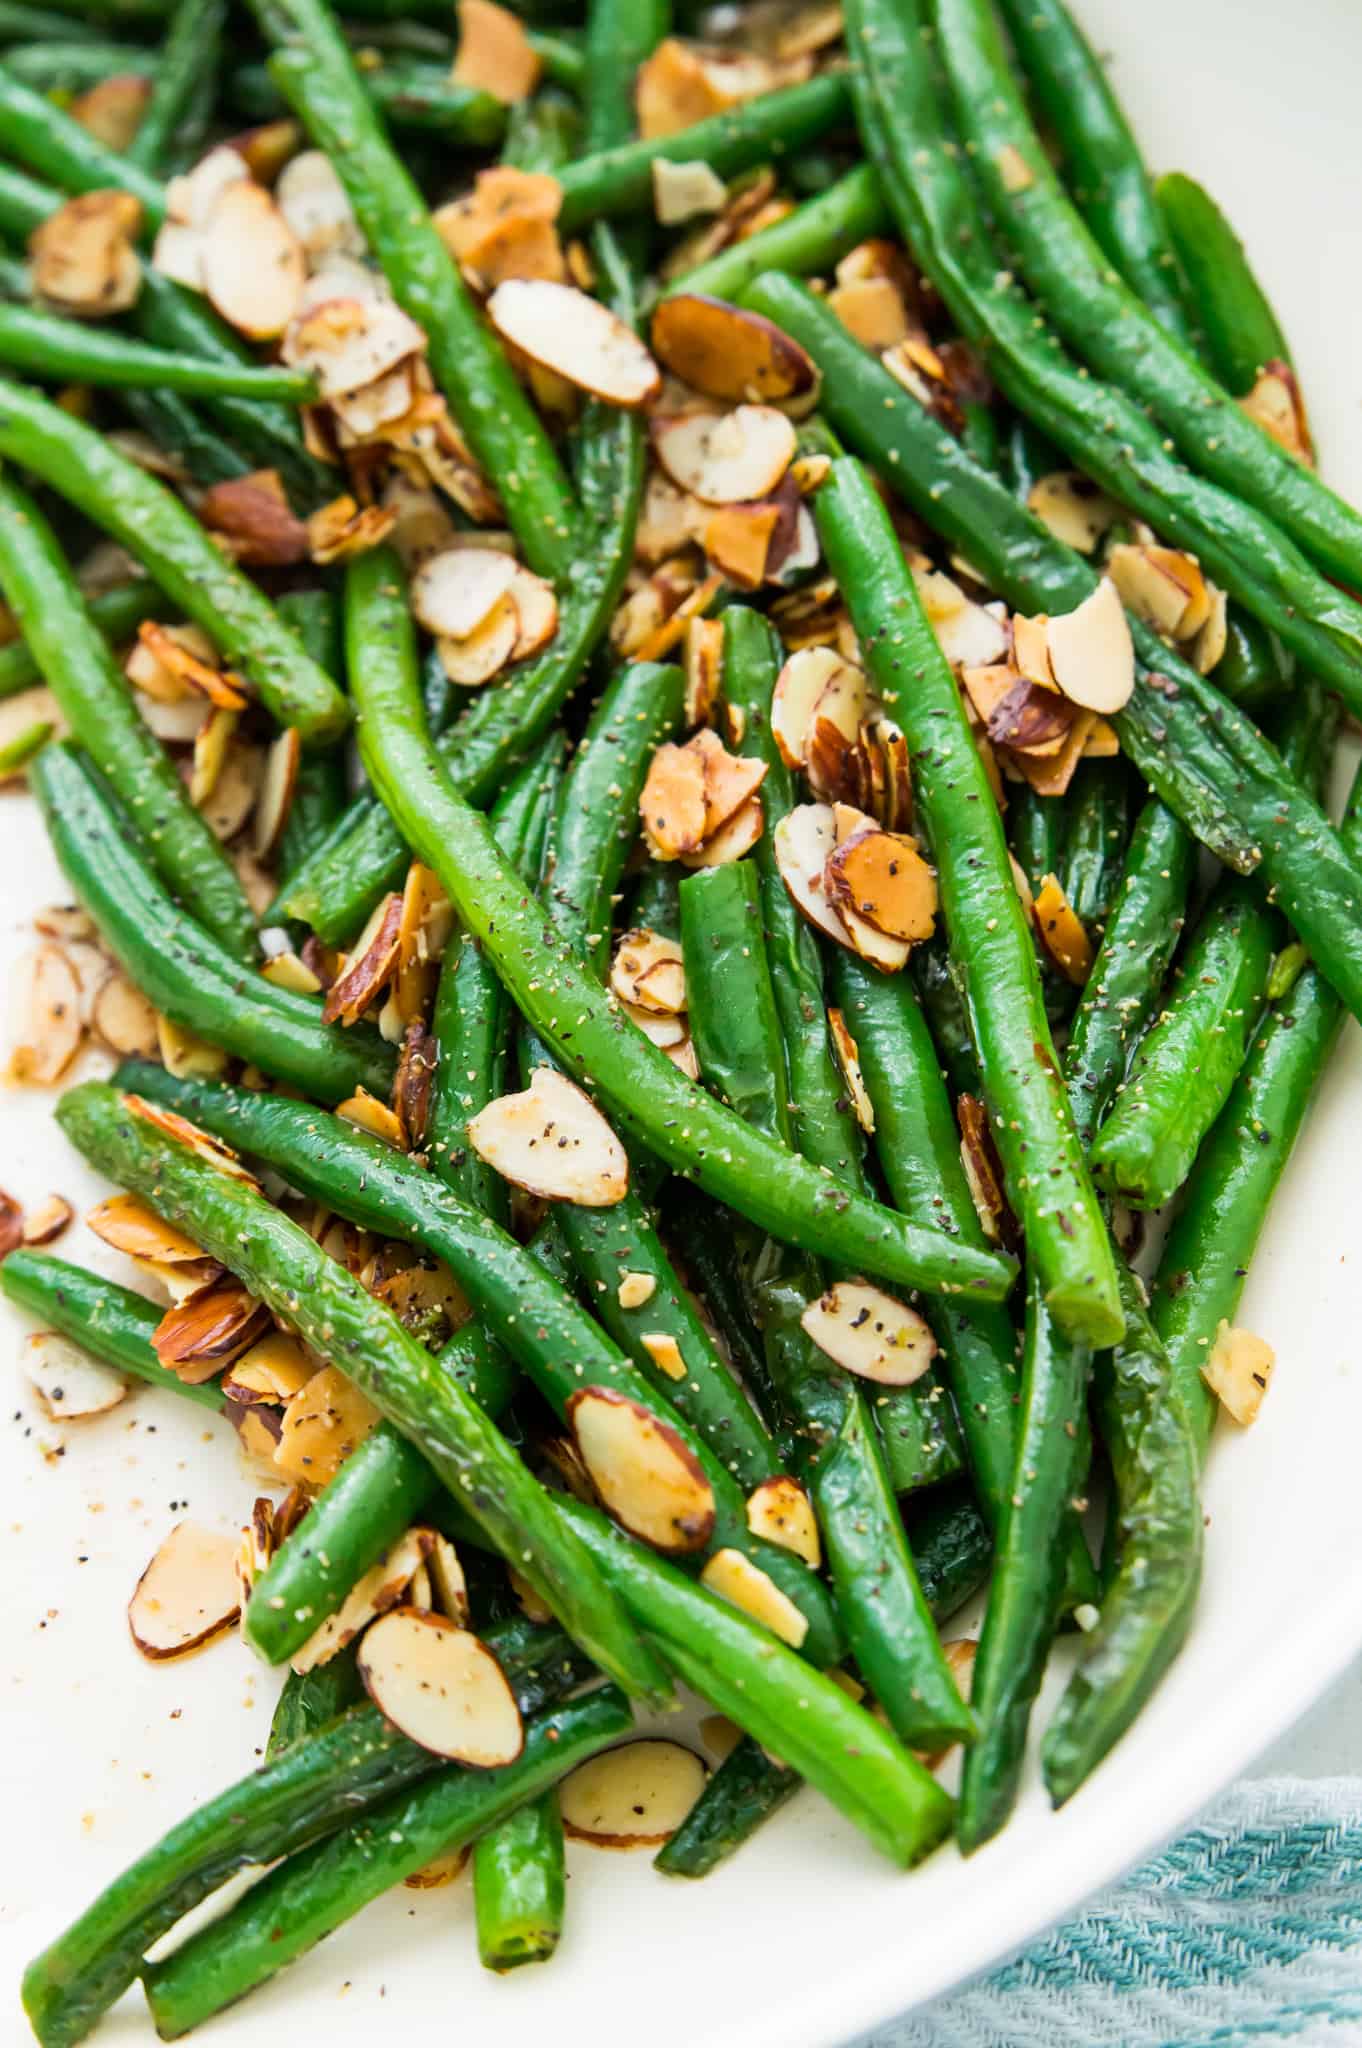 A dish filled with cooked green beans topped with slivered almonds.